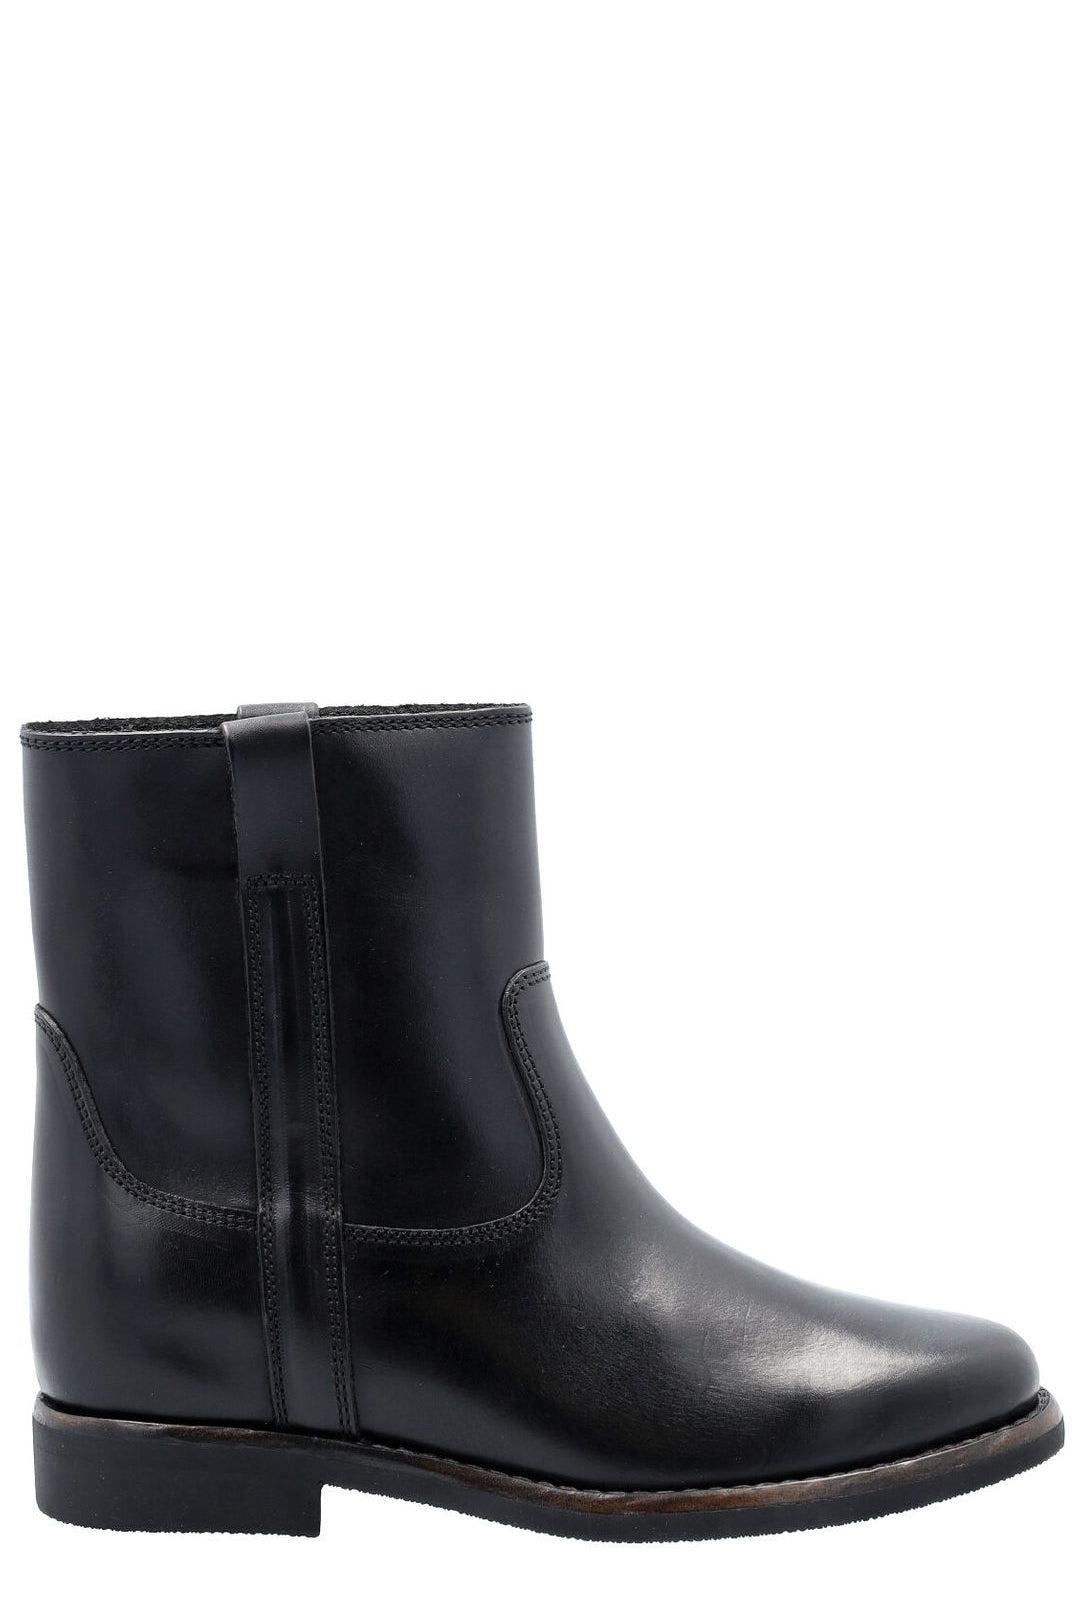 Isabel Marant Susee Ankle Boots